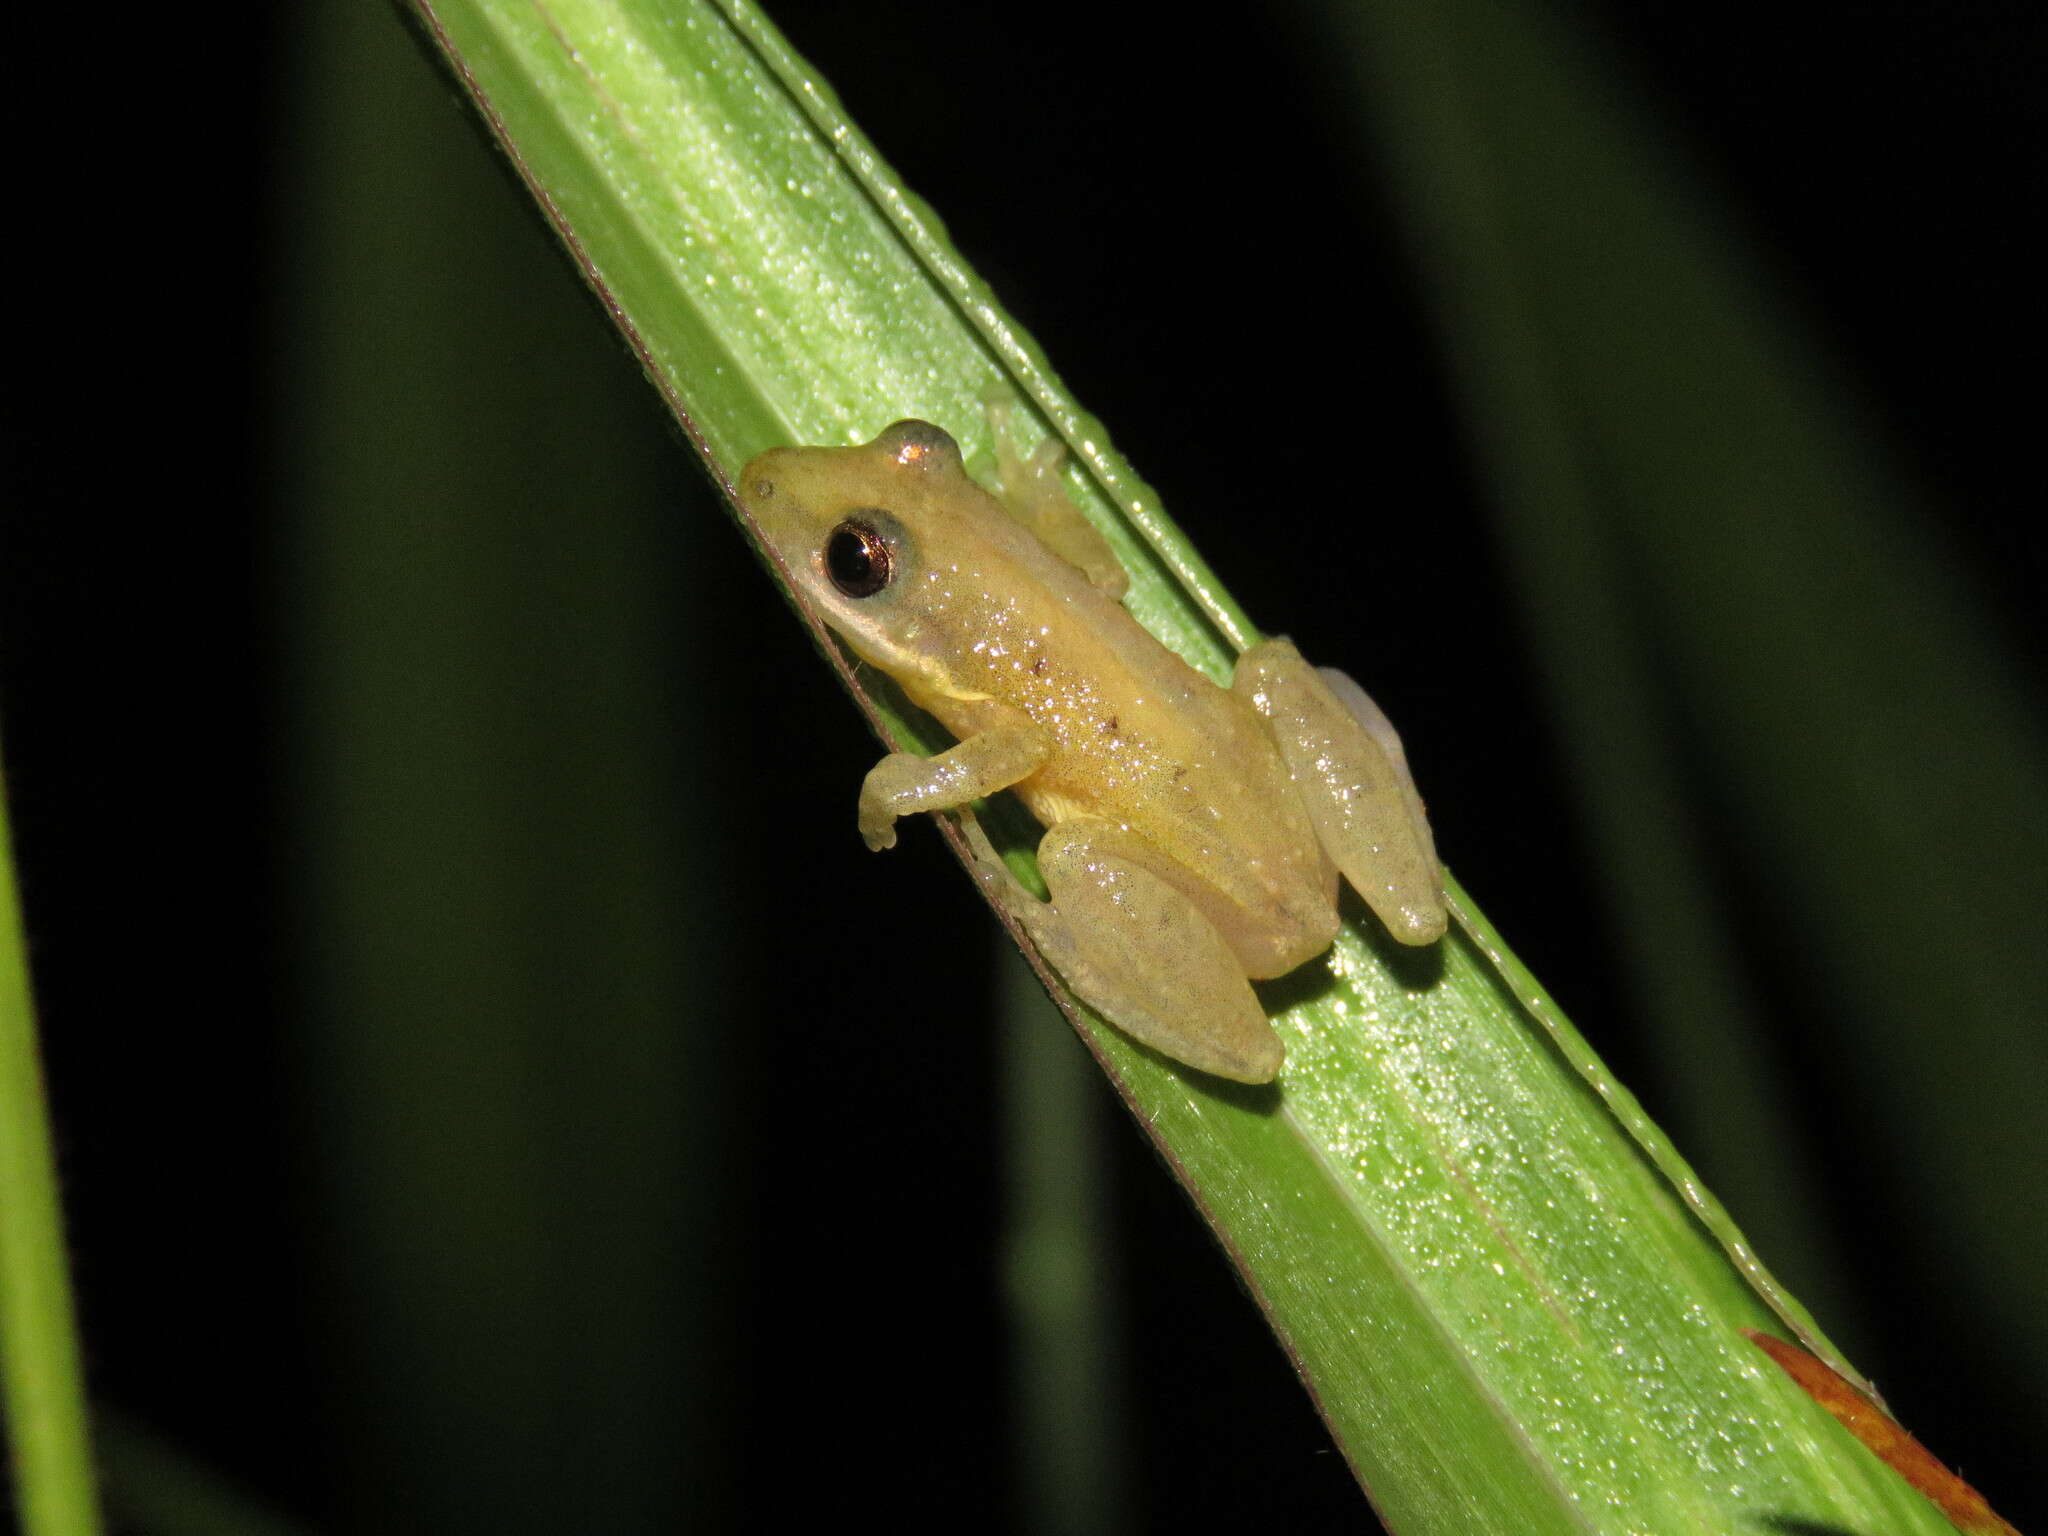 Image of Brown-bordered Snouted Treefrog